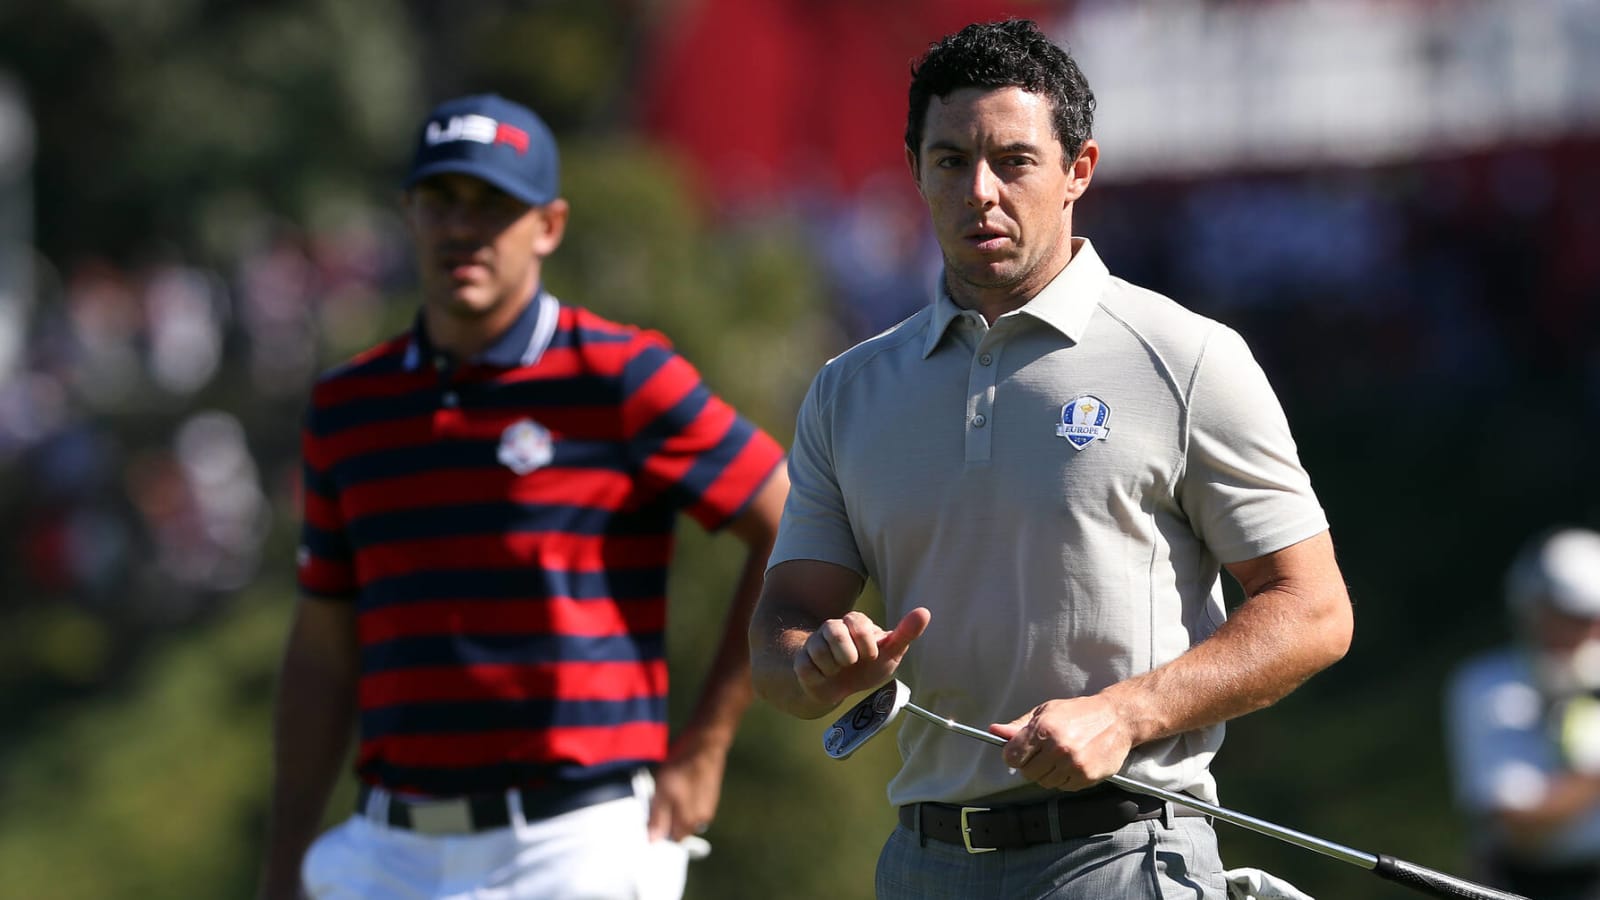 Brooks Koepka takes dig at Rory McIlroy ahead of Masters